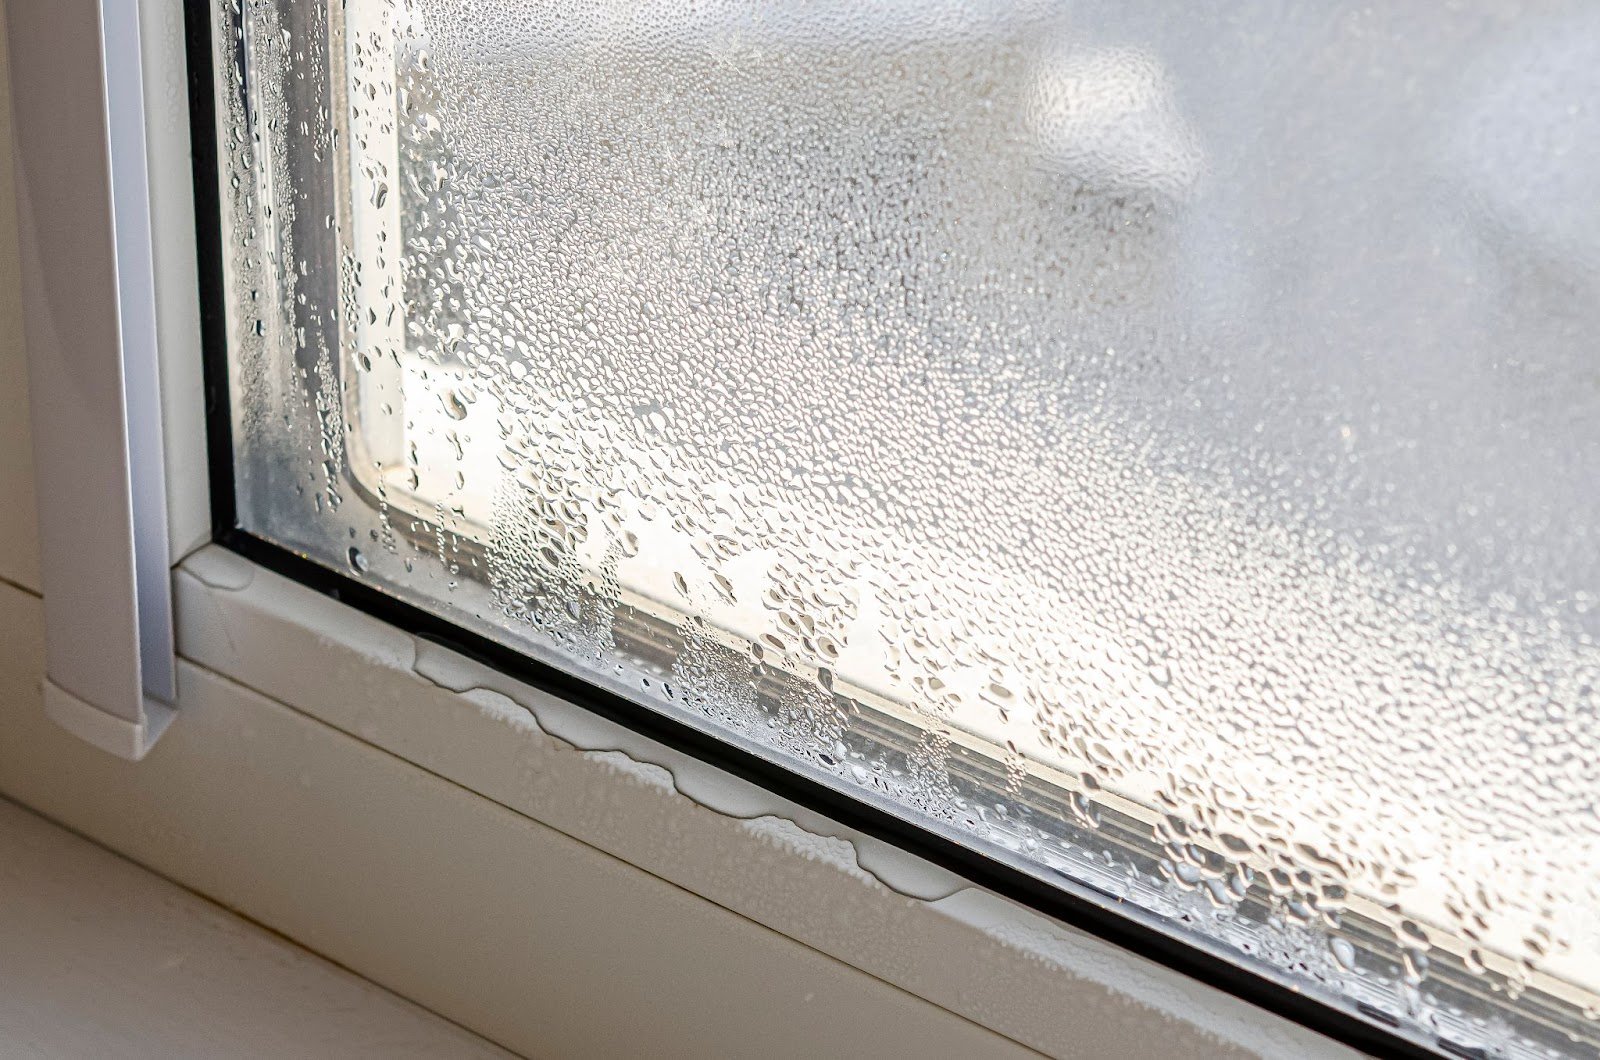 Thunderstorms & Water Leaks: How to Keep Water from Coming Through Your Windows